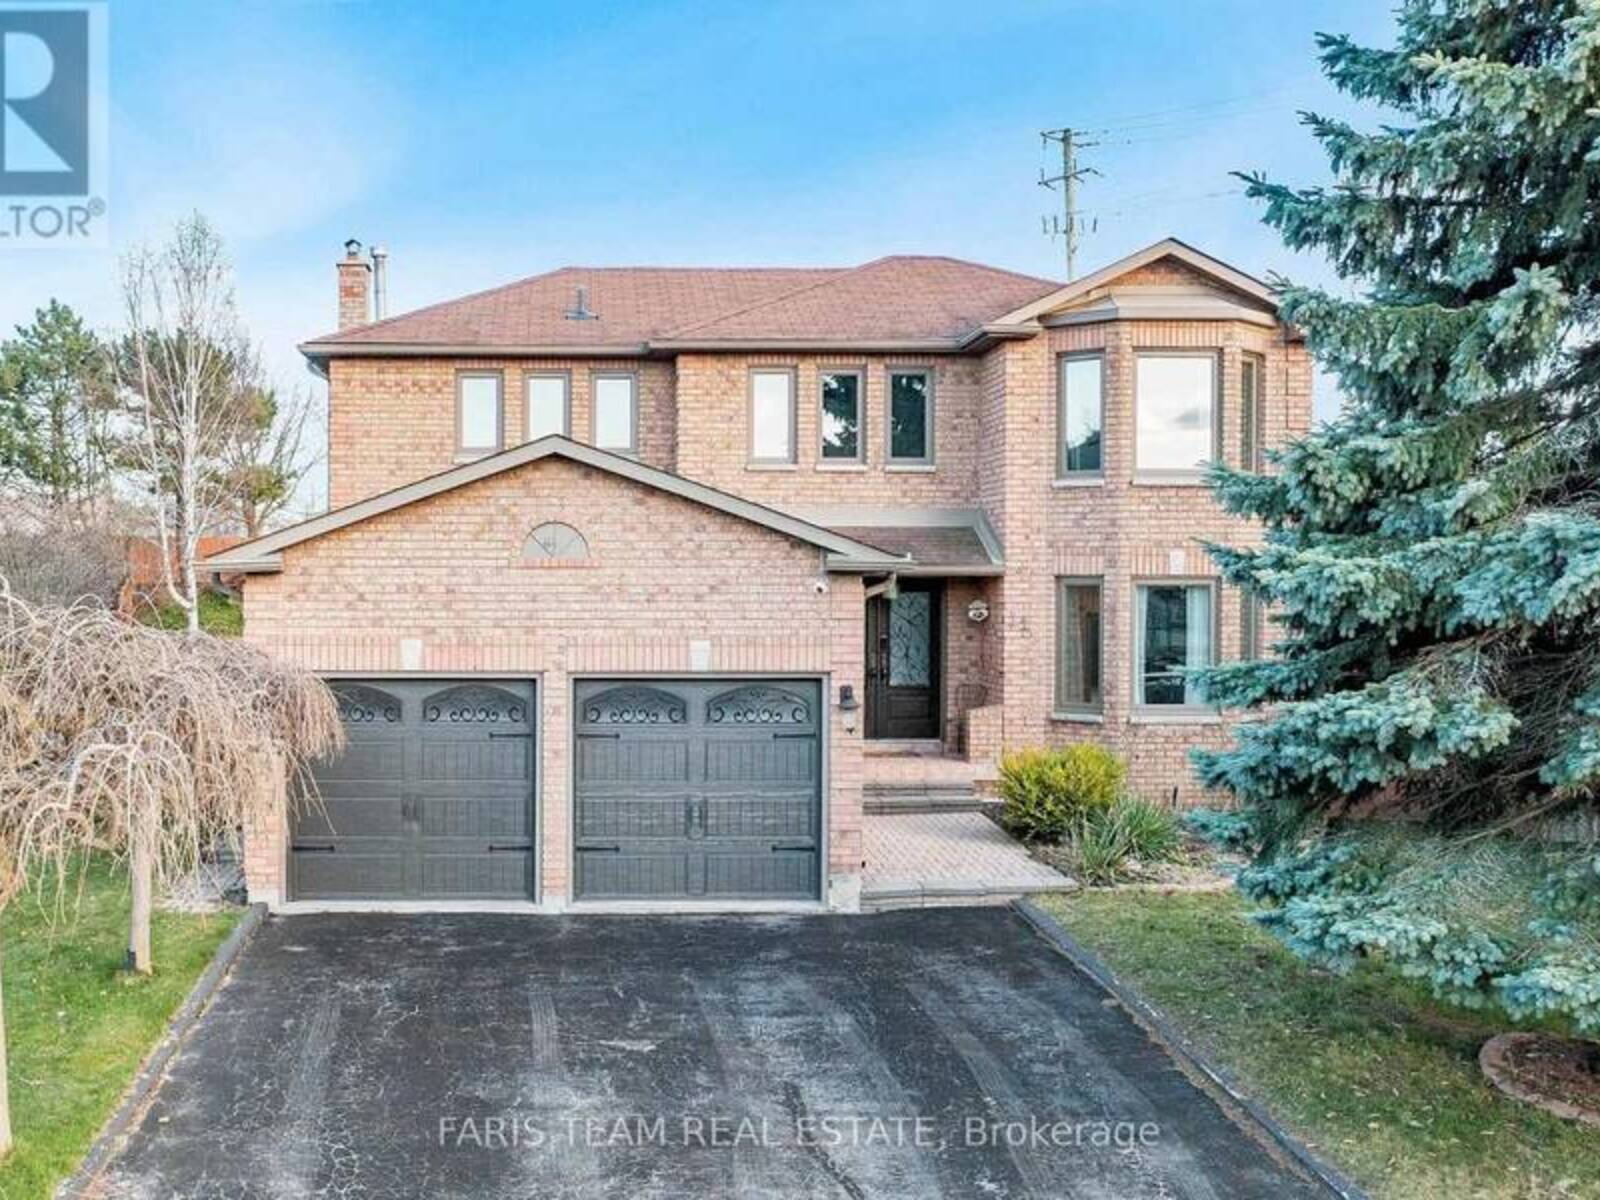 11 CITYVIEW CIRC, Barrie, Ontario L4N 7V2